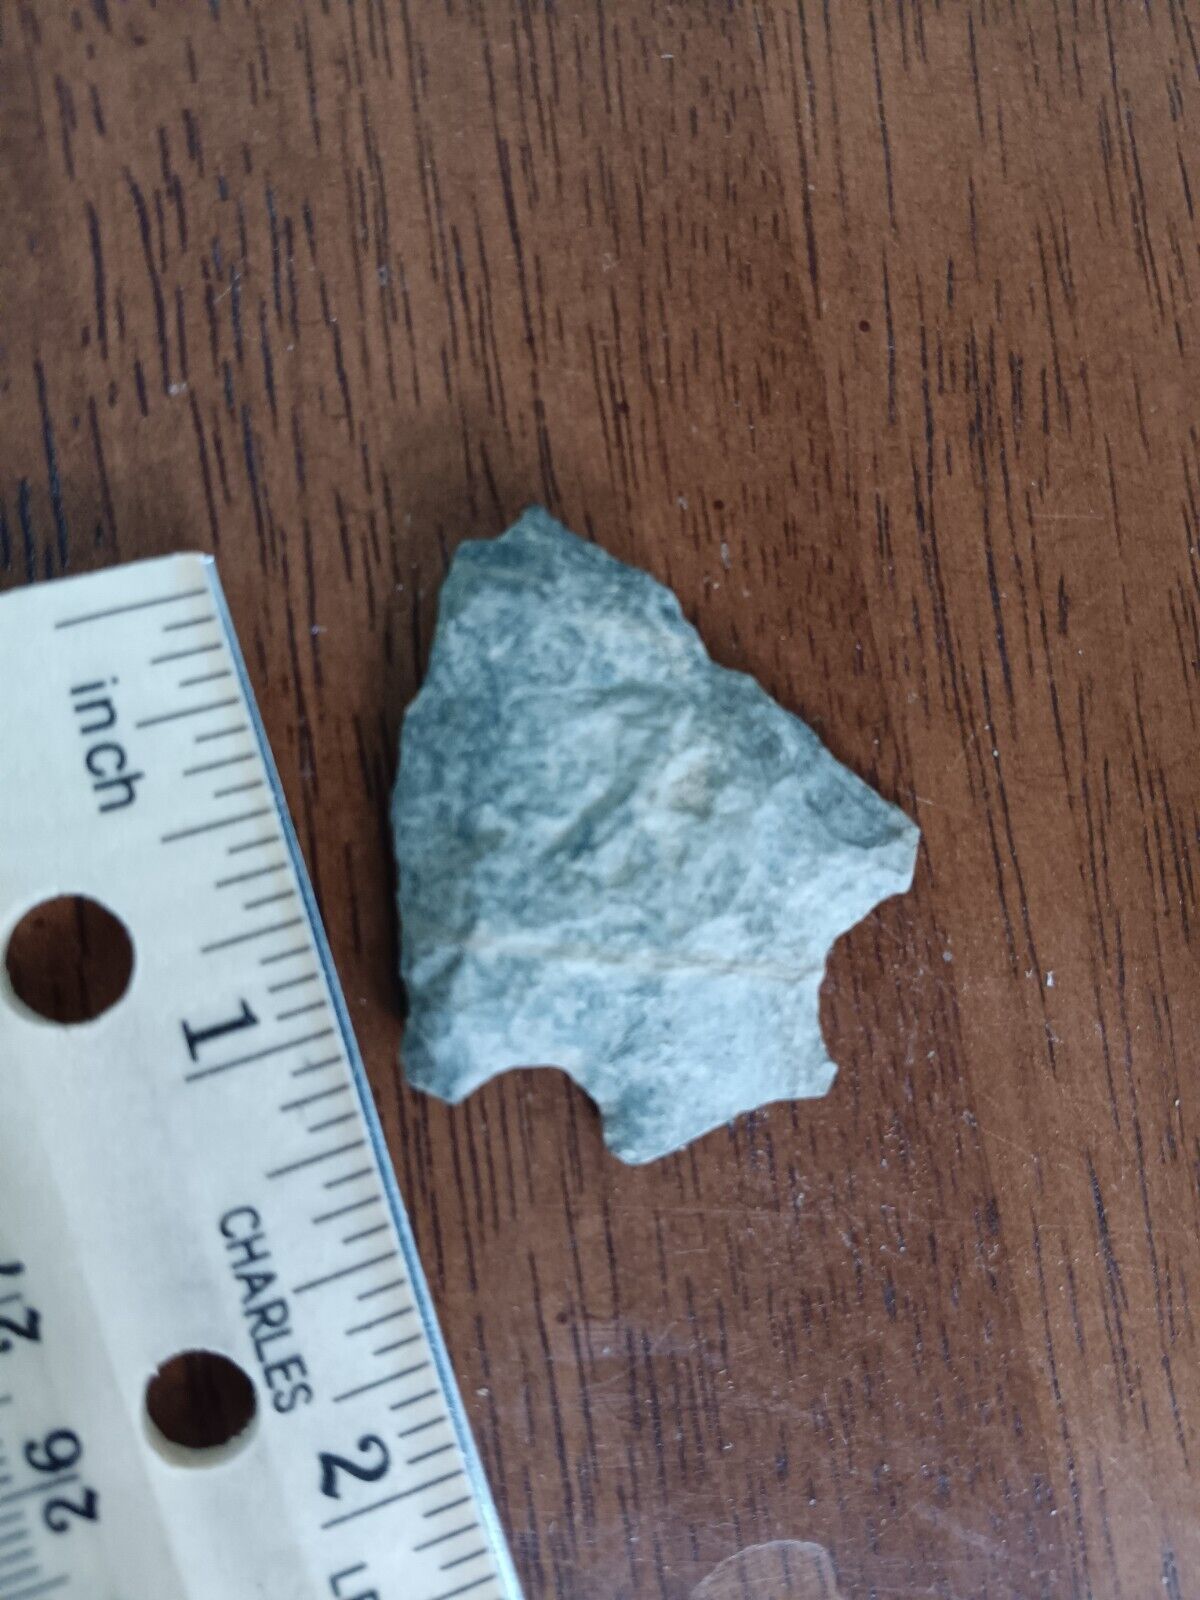 AUTHENTIC NATIVE AMERICAN INDIAN ARTIFACT FOUND, EASTERN N.C.--- ZZZ/62